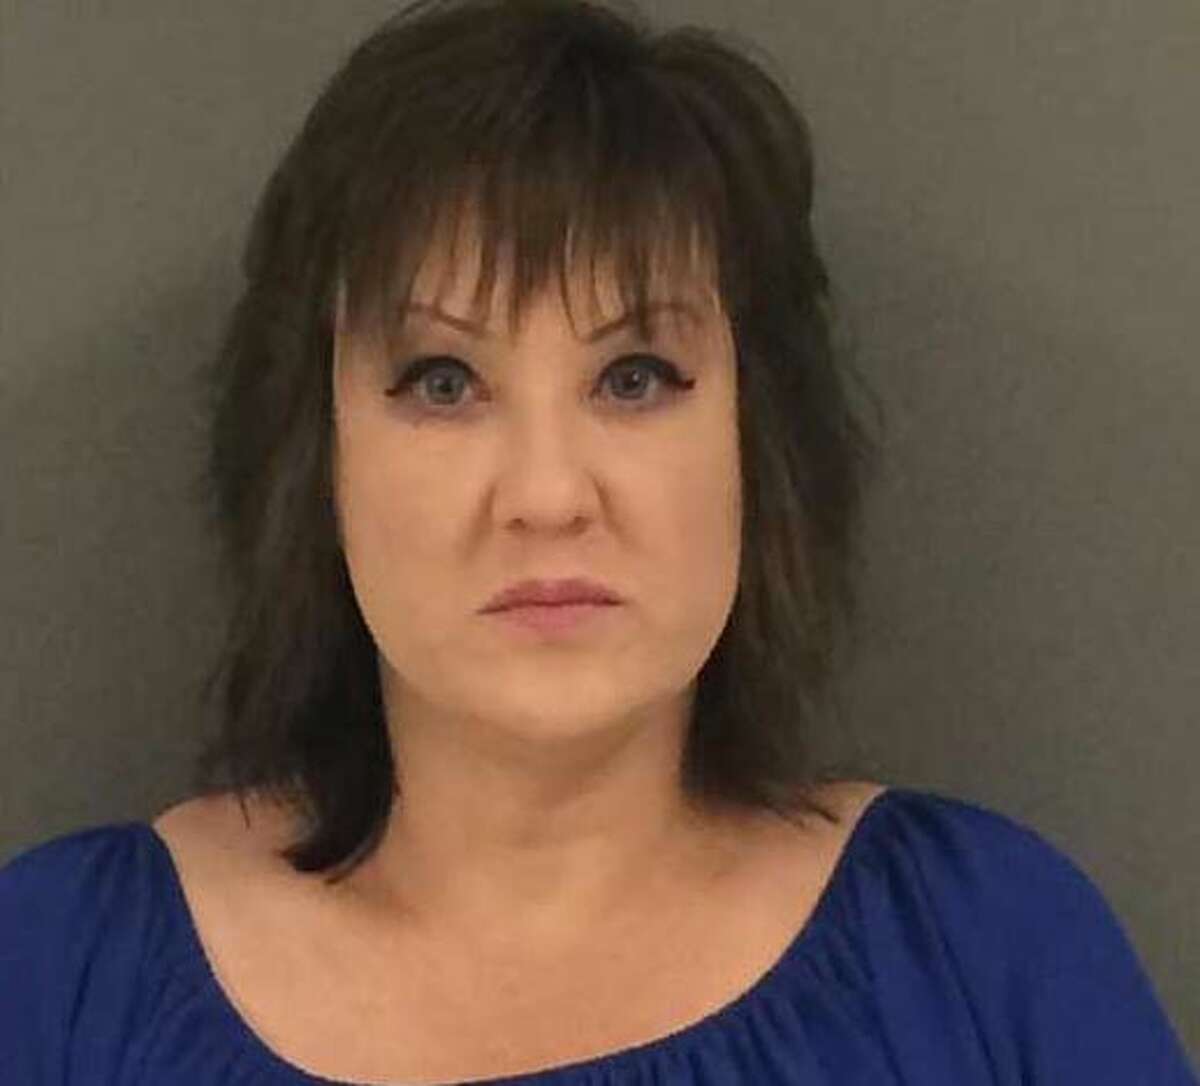 Brenda Pawelek, 44, was indicted on charges of sexual assault of a minor after a boy admitted to having sex with her in 2014-2015 school year.